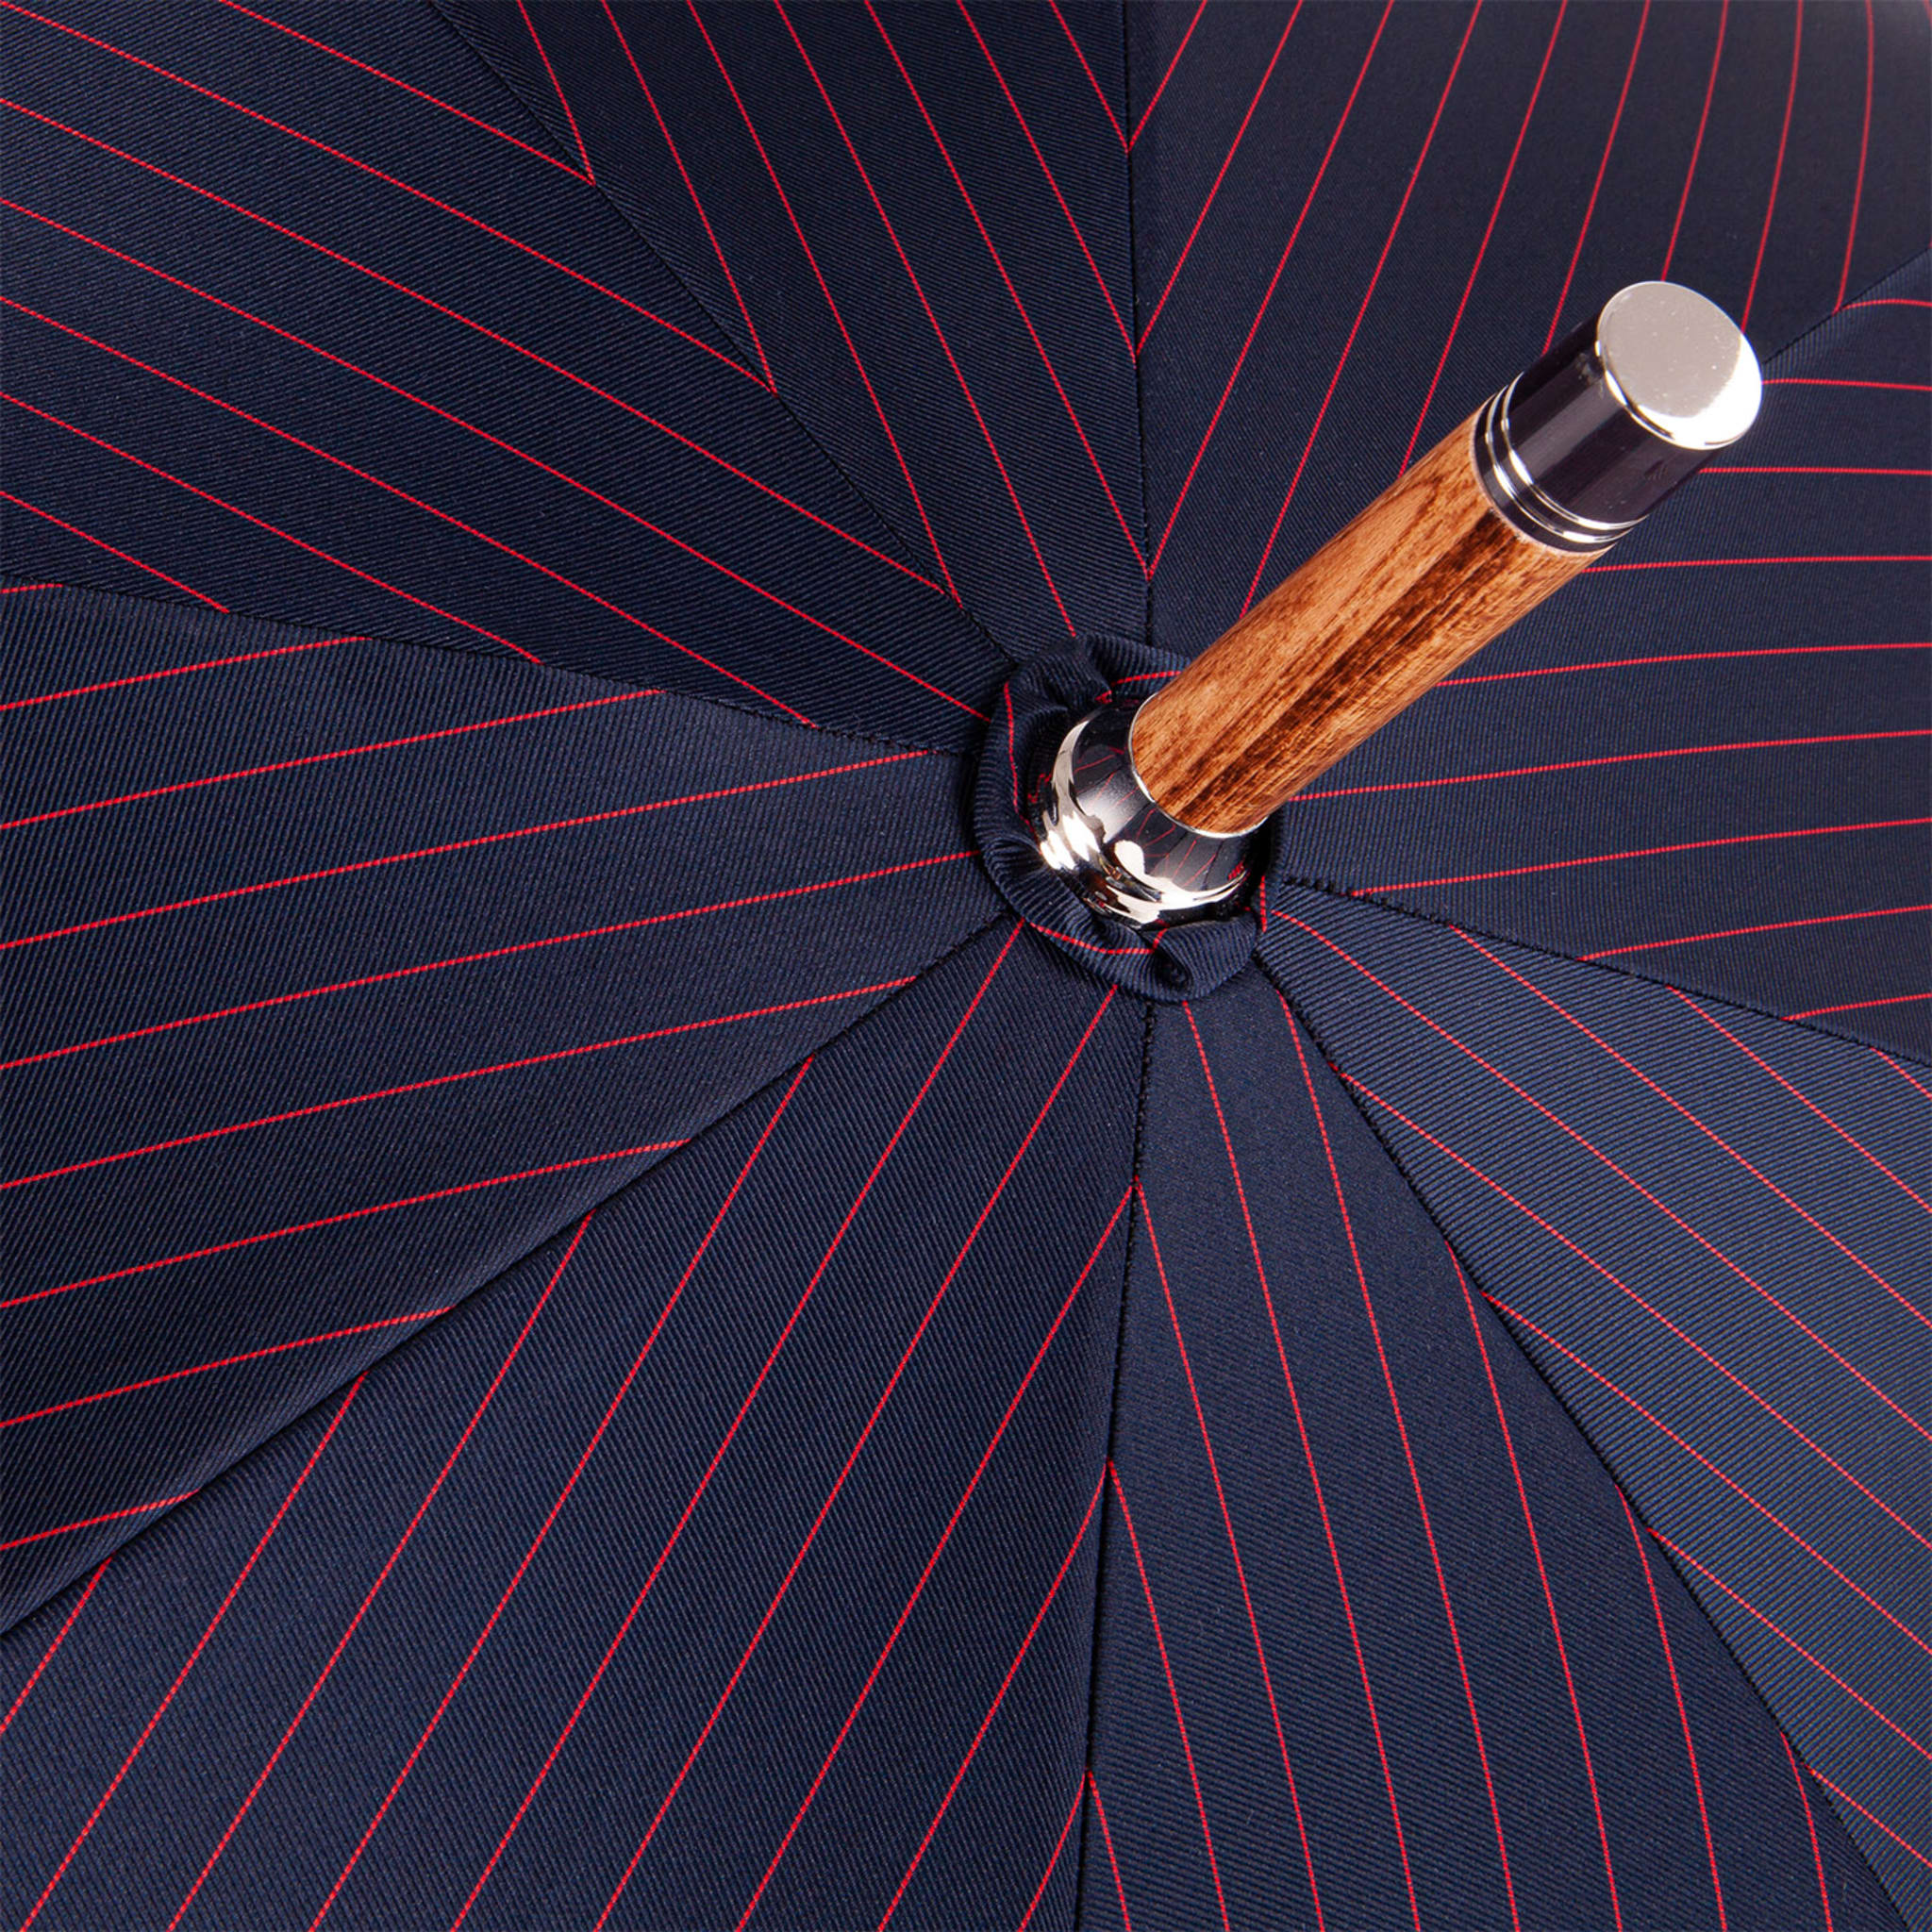 Japanese Bamboo Navy and Red Umbrella - Alternative view 1